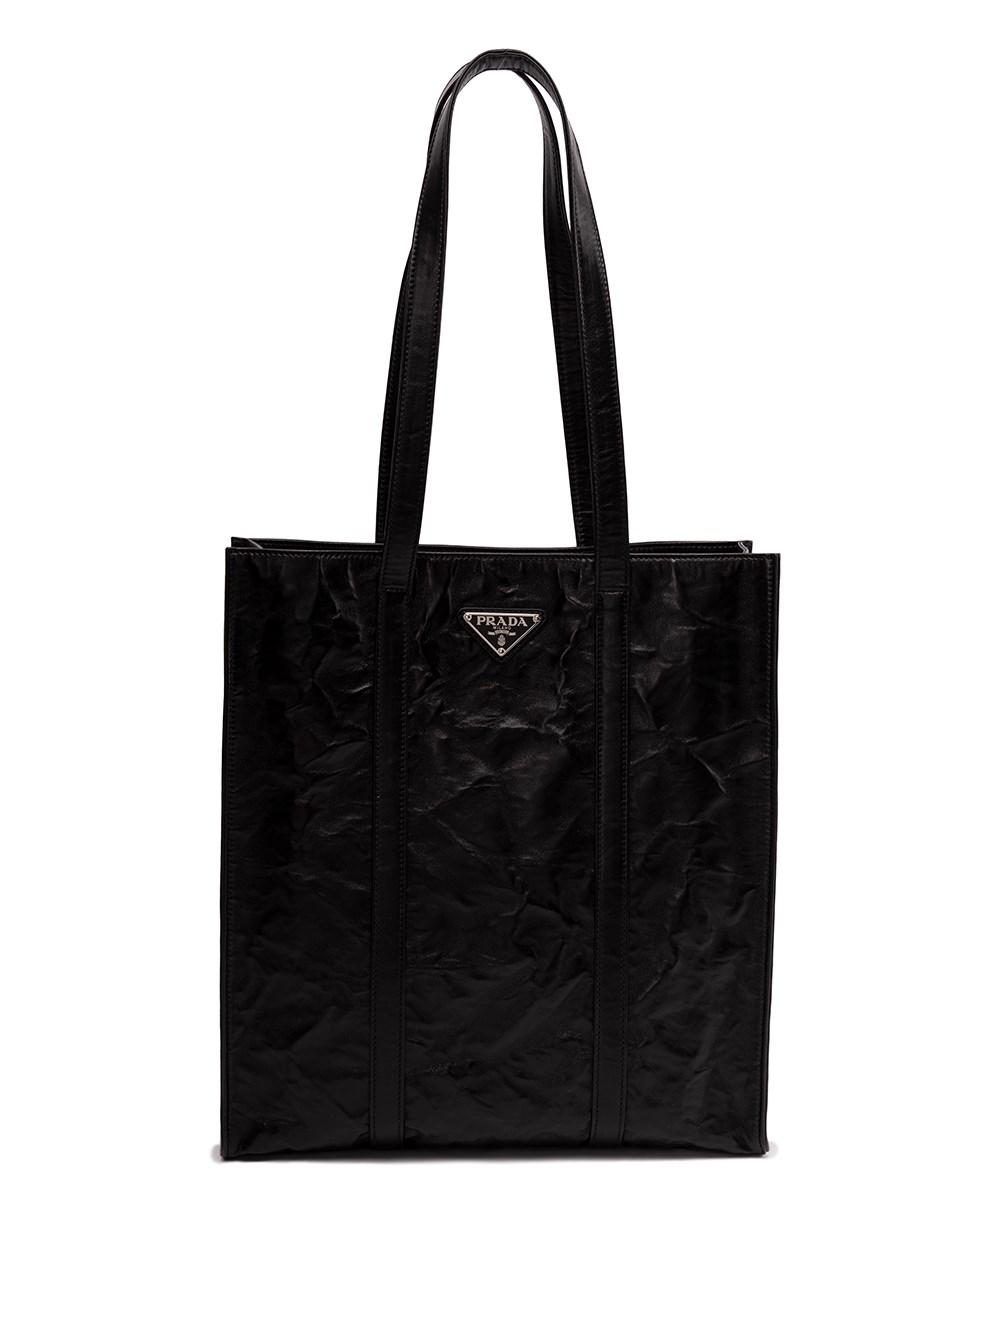 Prada Small Distressed Leather Tote in Black | Lyst